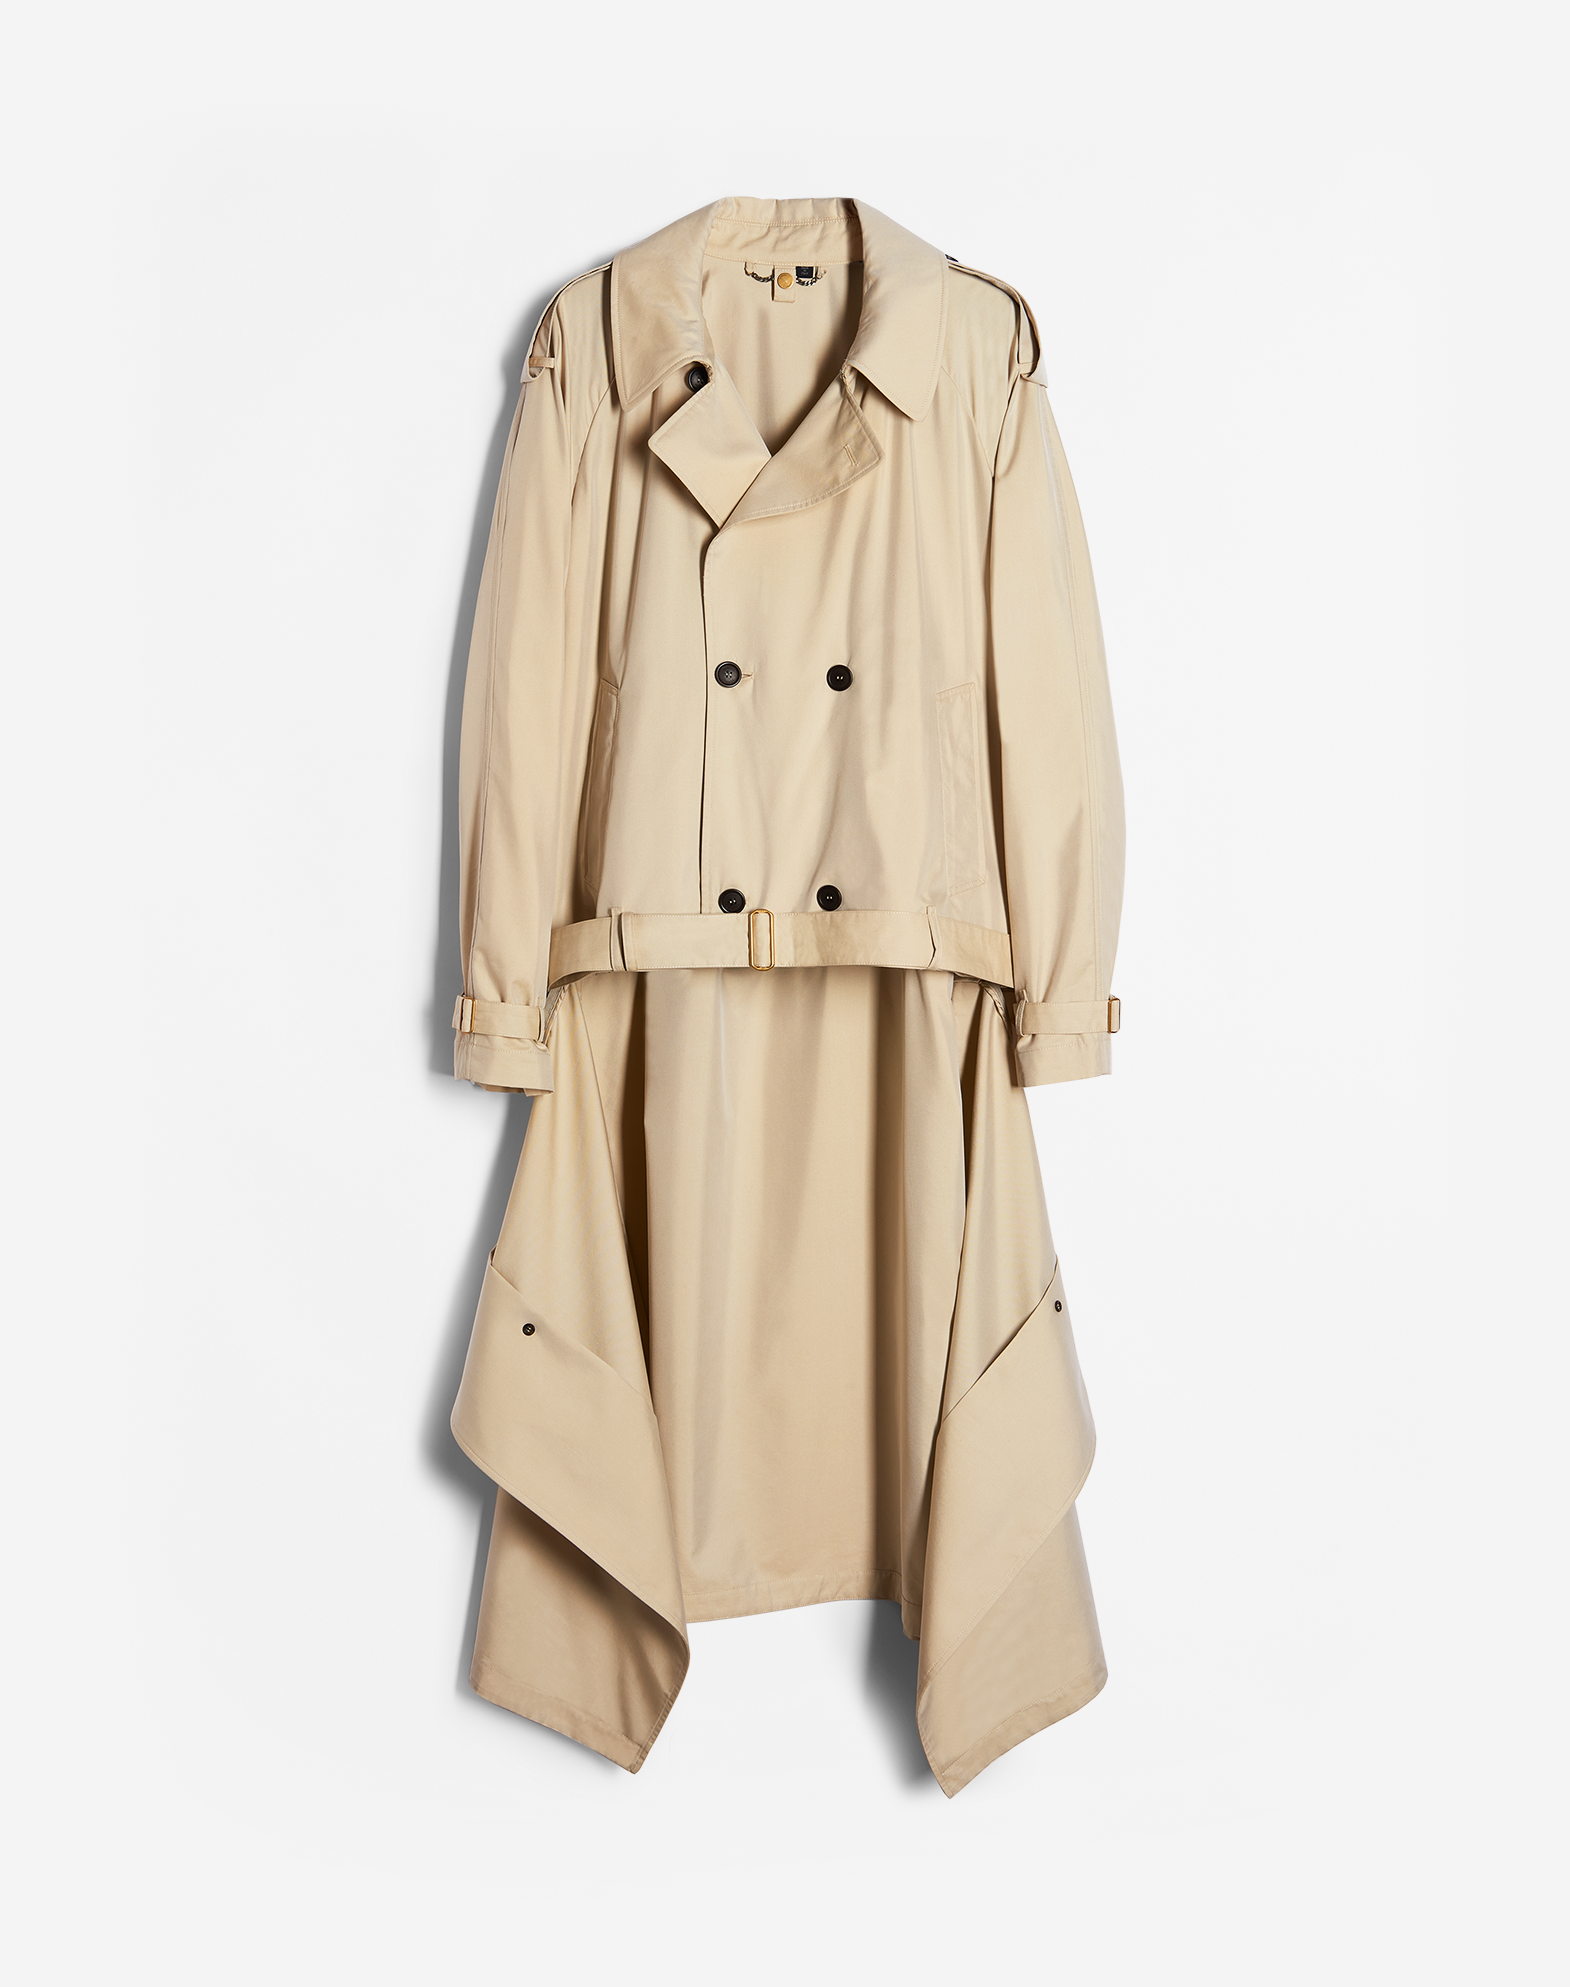 Dunhill Men's Trench Coats